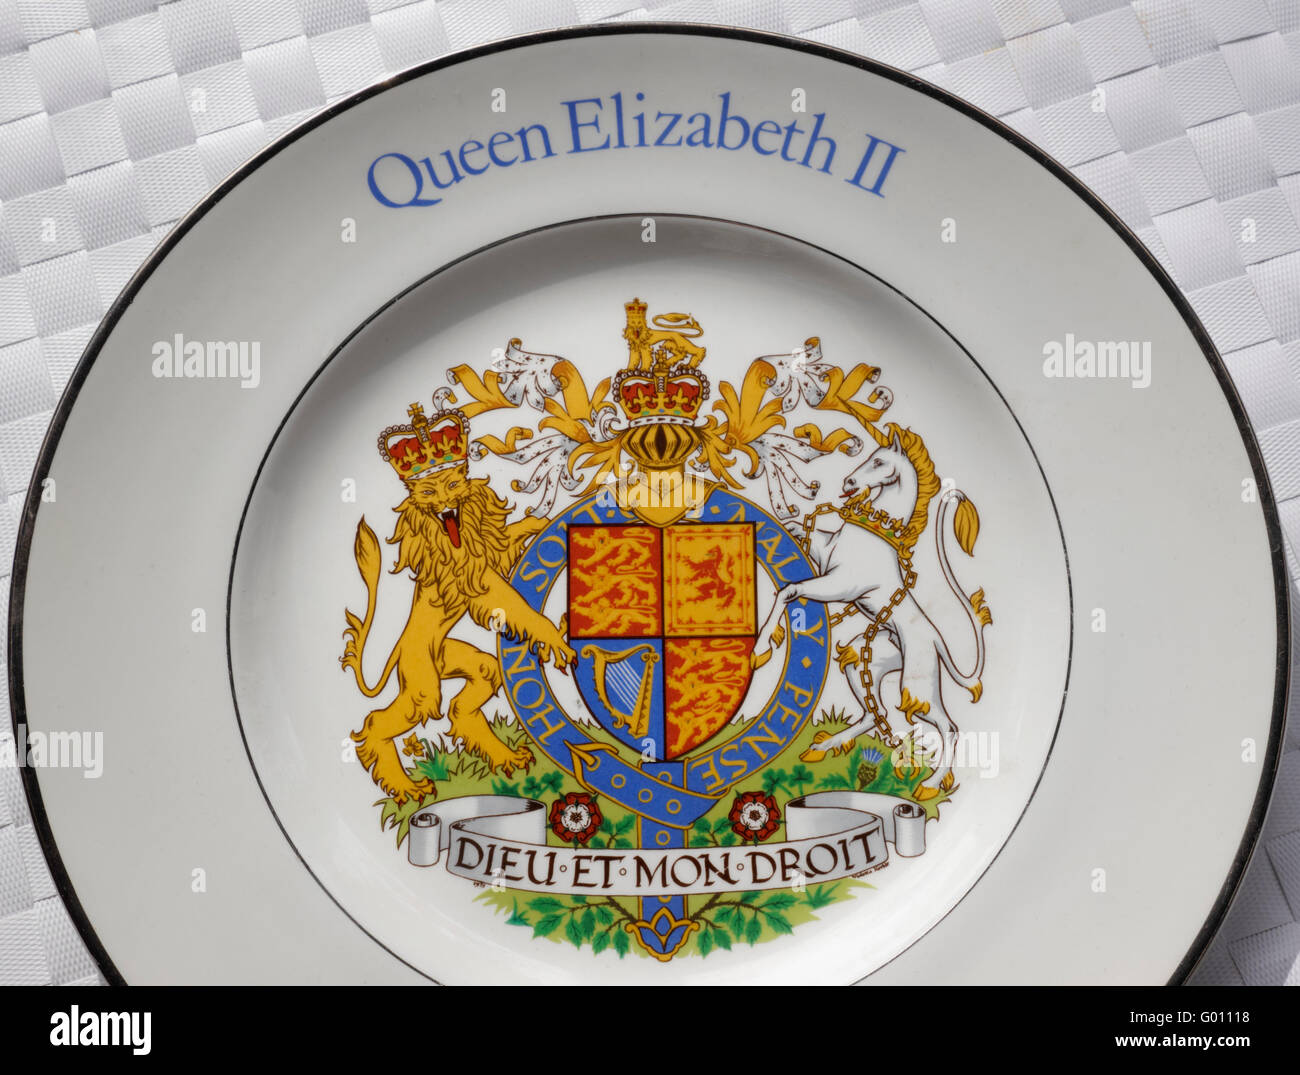 HM Queen Elizabeth II commemorative plate with The Queen’s unique official coat of arms DIEU ET MON DROIT  ('God and My Right') Stock Photo